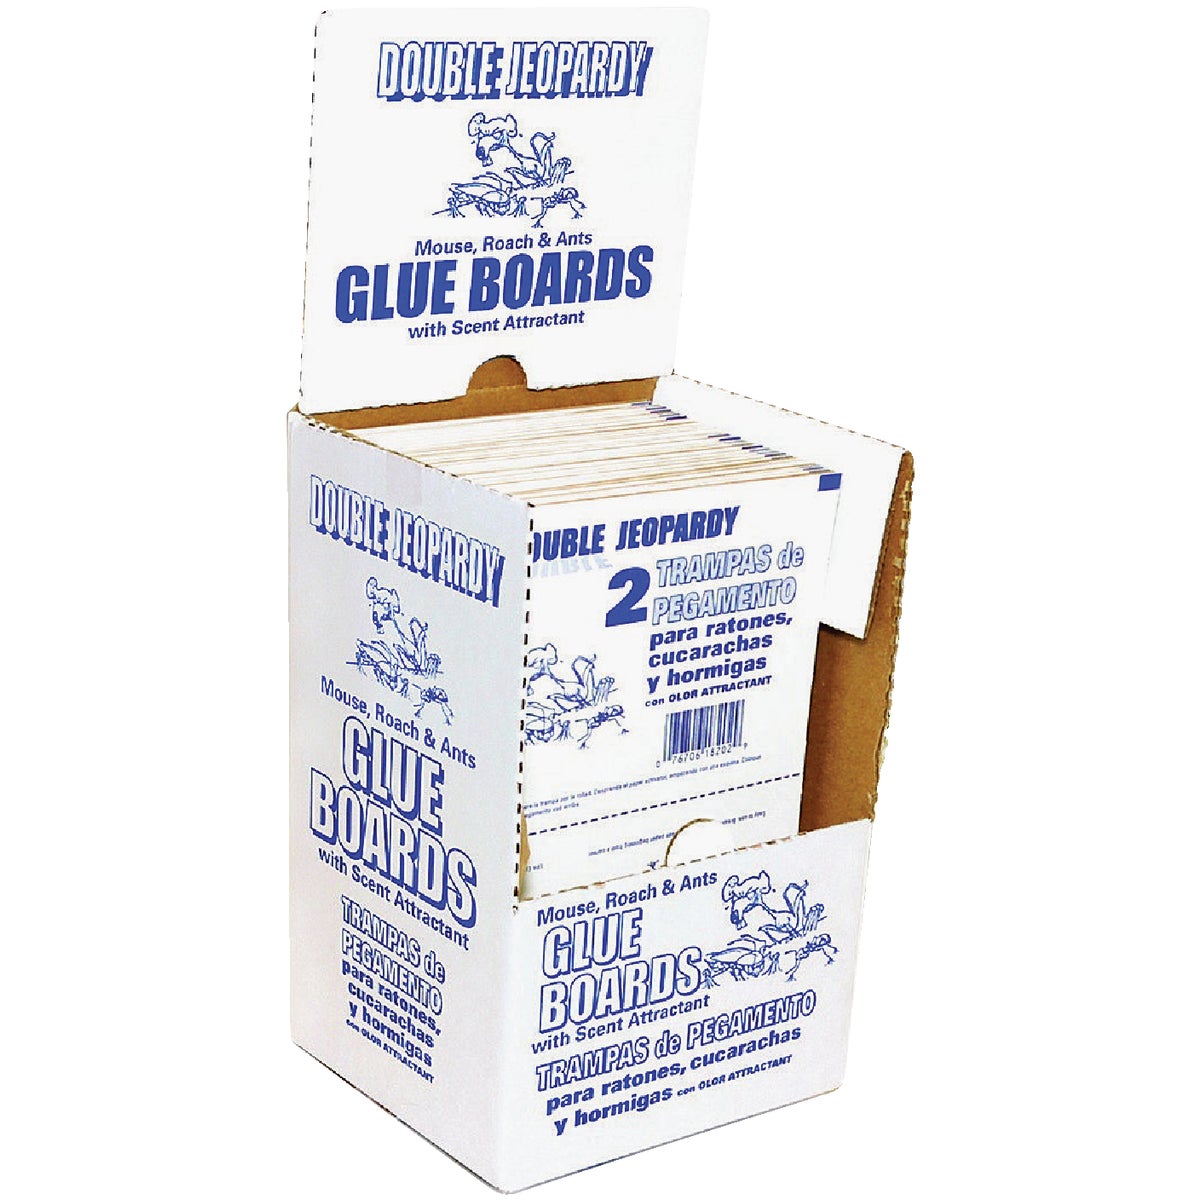 Item 701900, Disposable glue board for catching mice and insects.